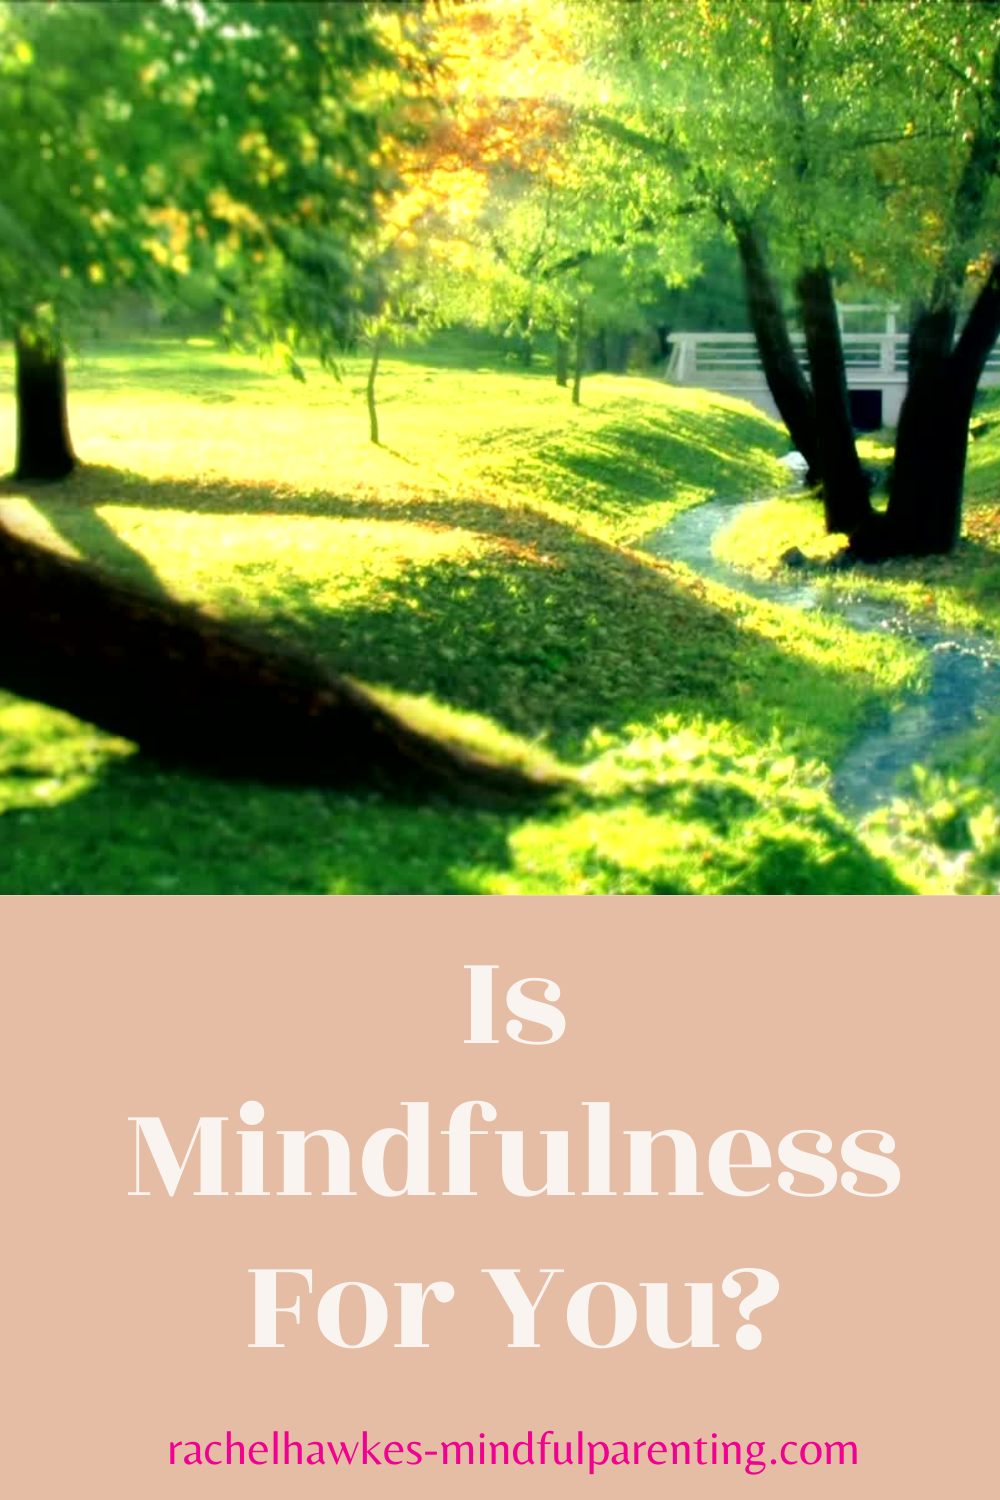 Is mindfulness for you?